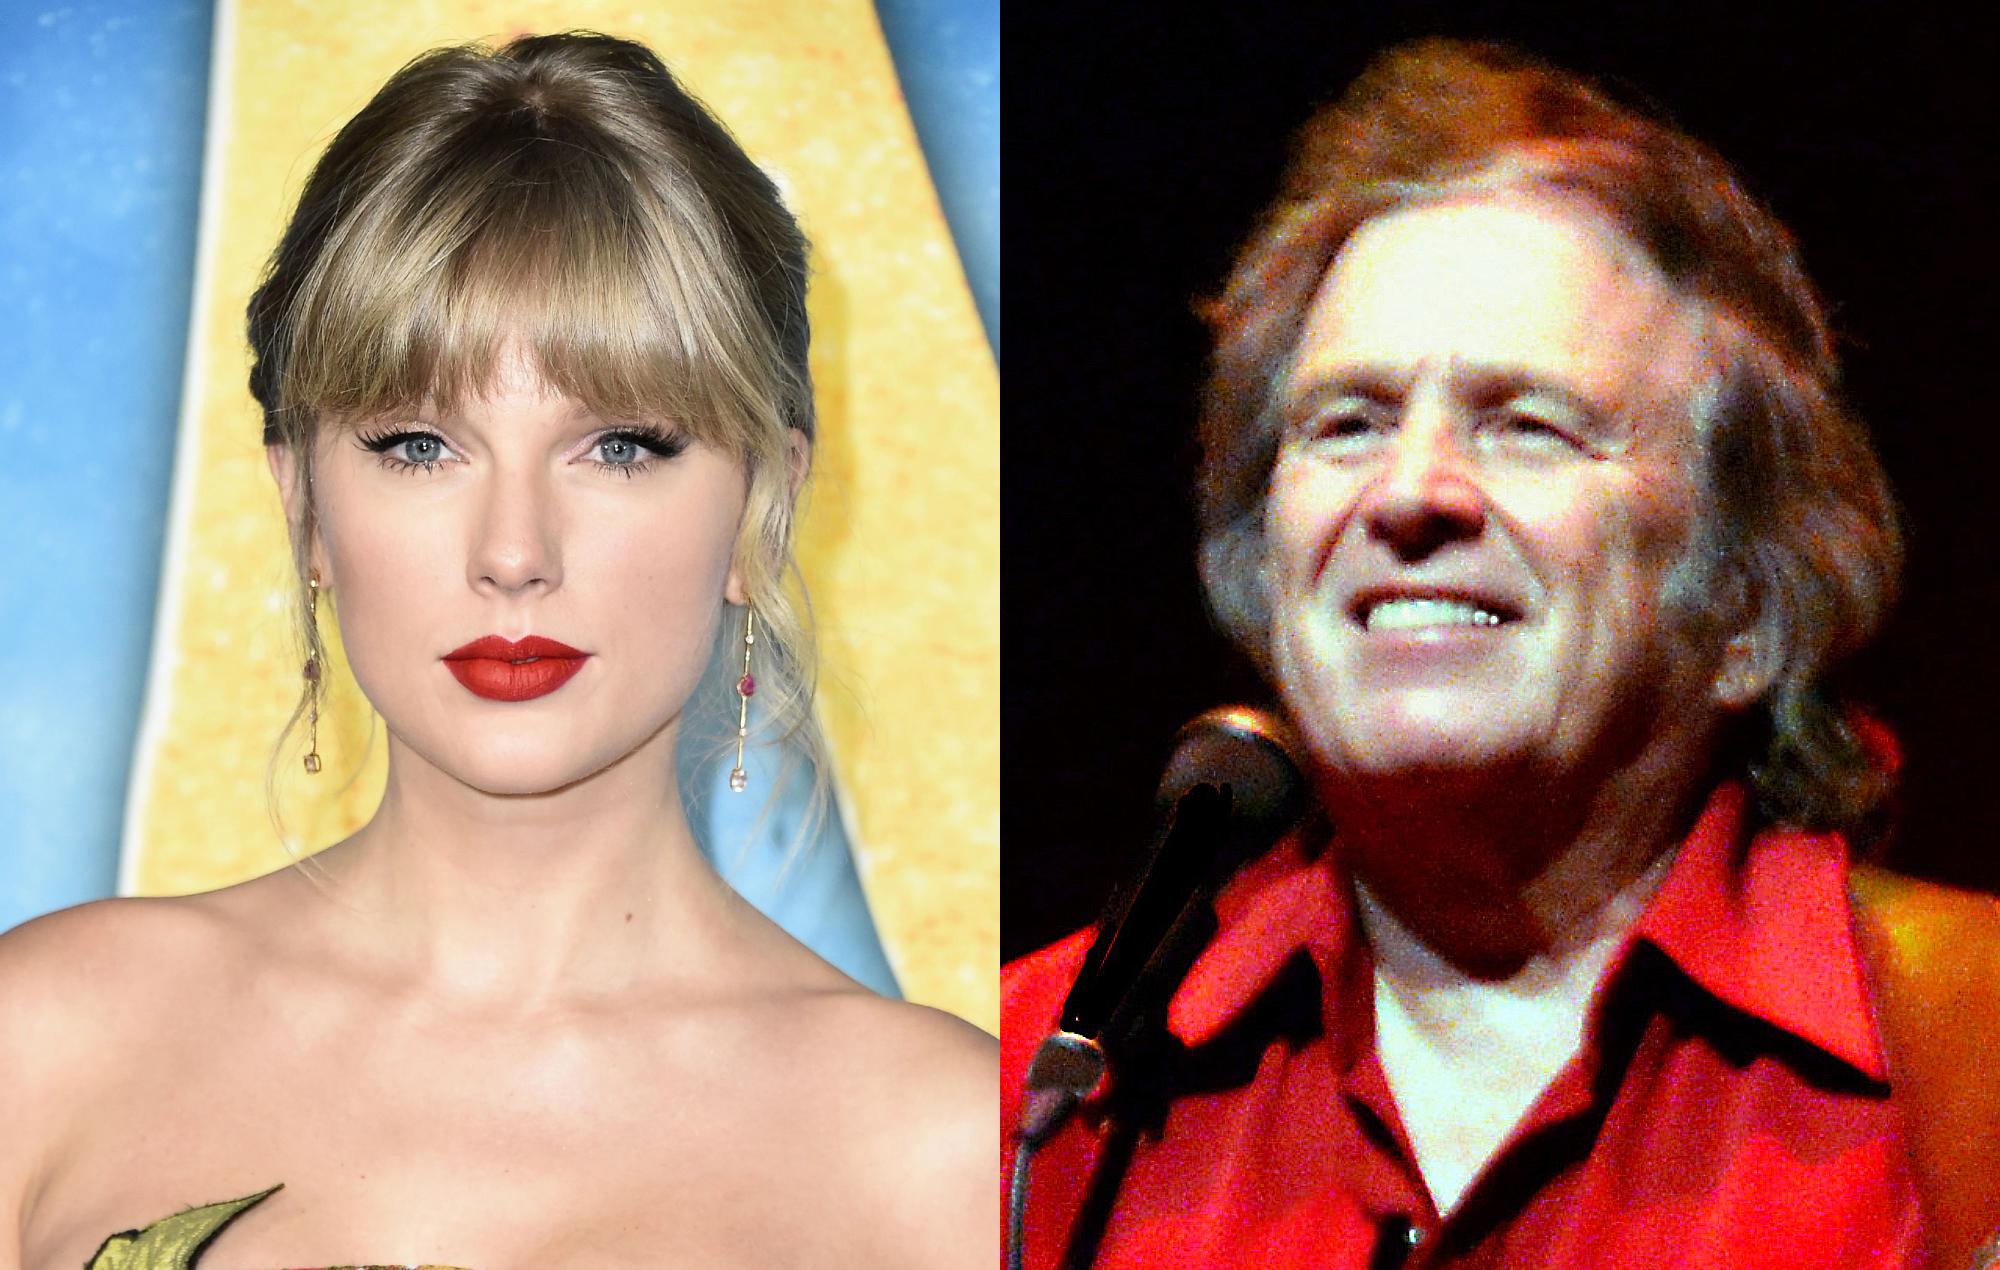 Taylor Swift and Don McLean pictured in a composite image